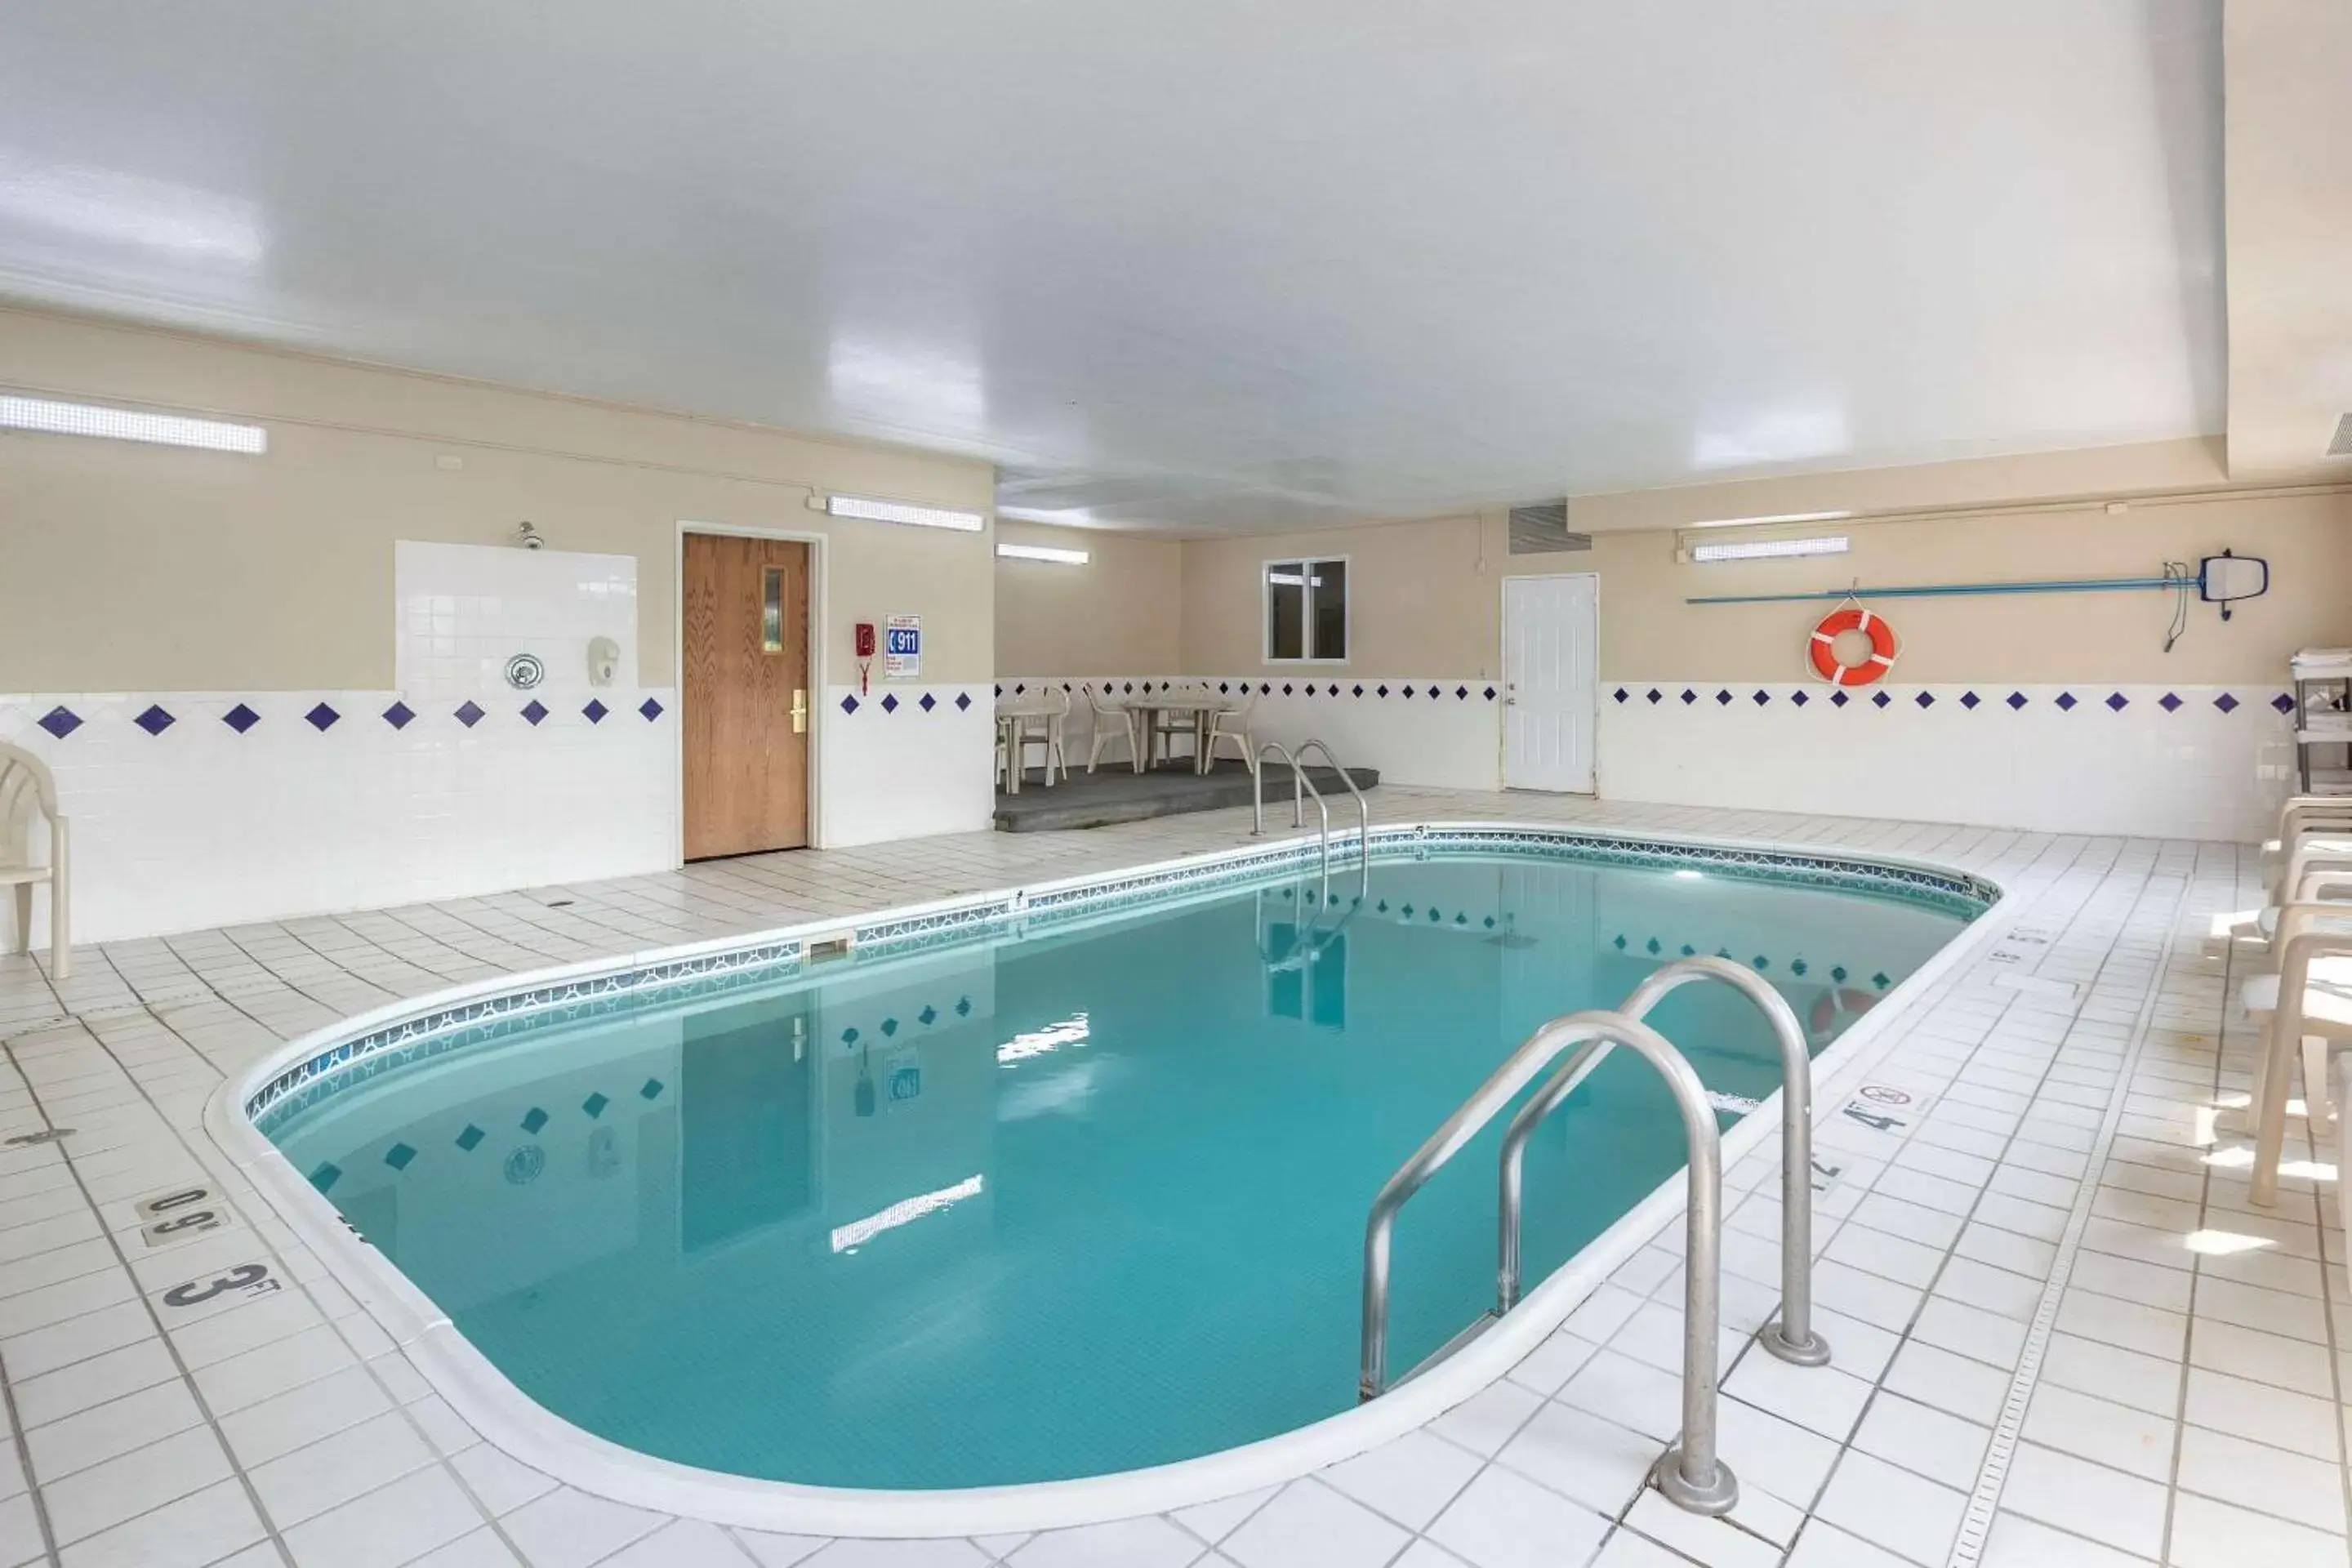 Activities, Swimming Pool in Comfort Inn Muscatine near Hwy 61